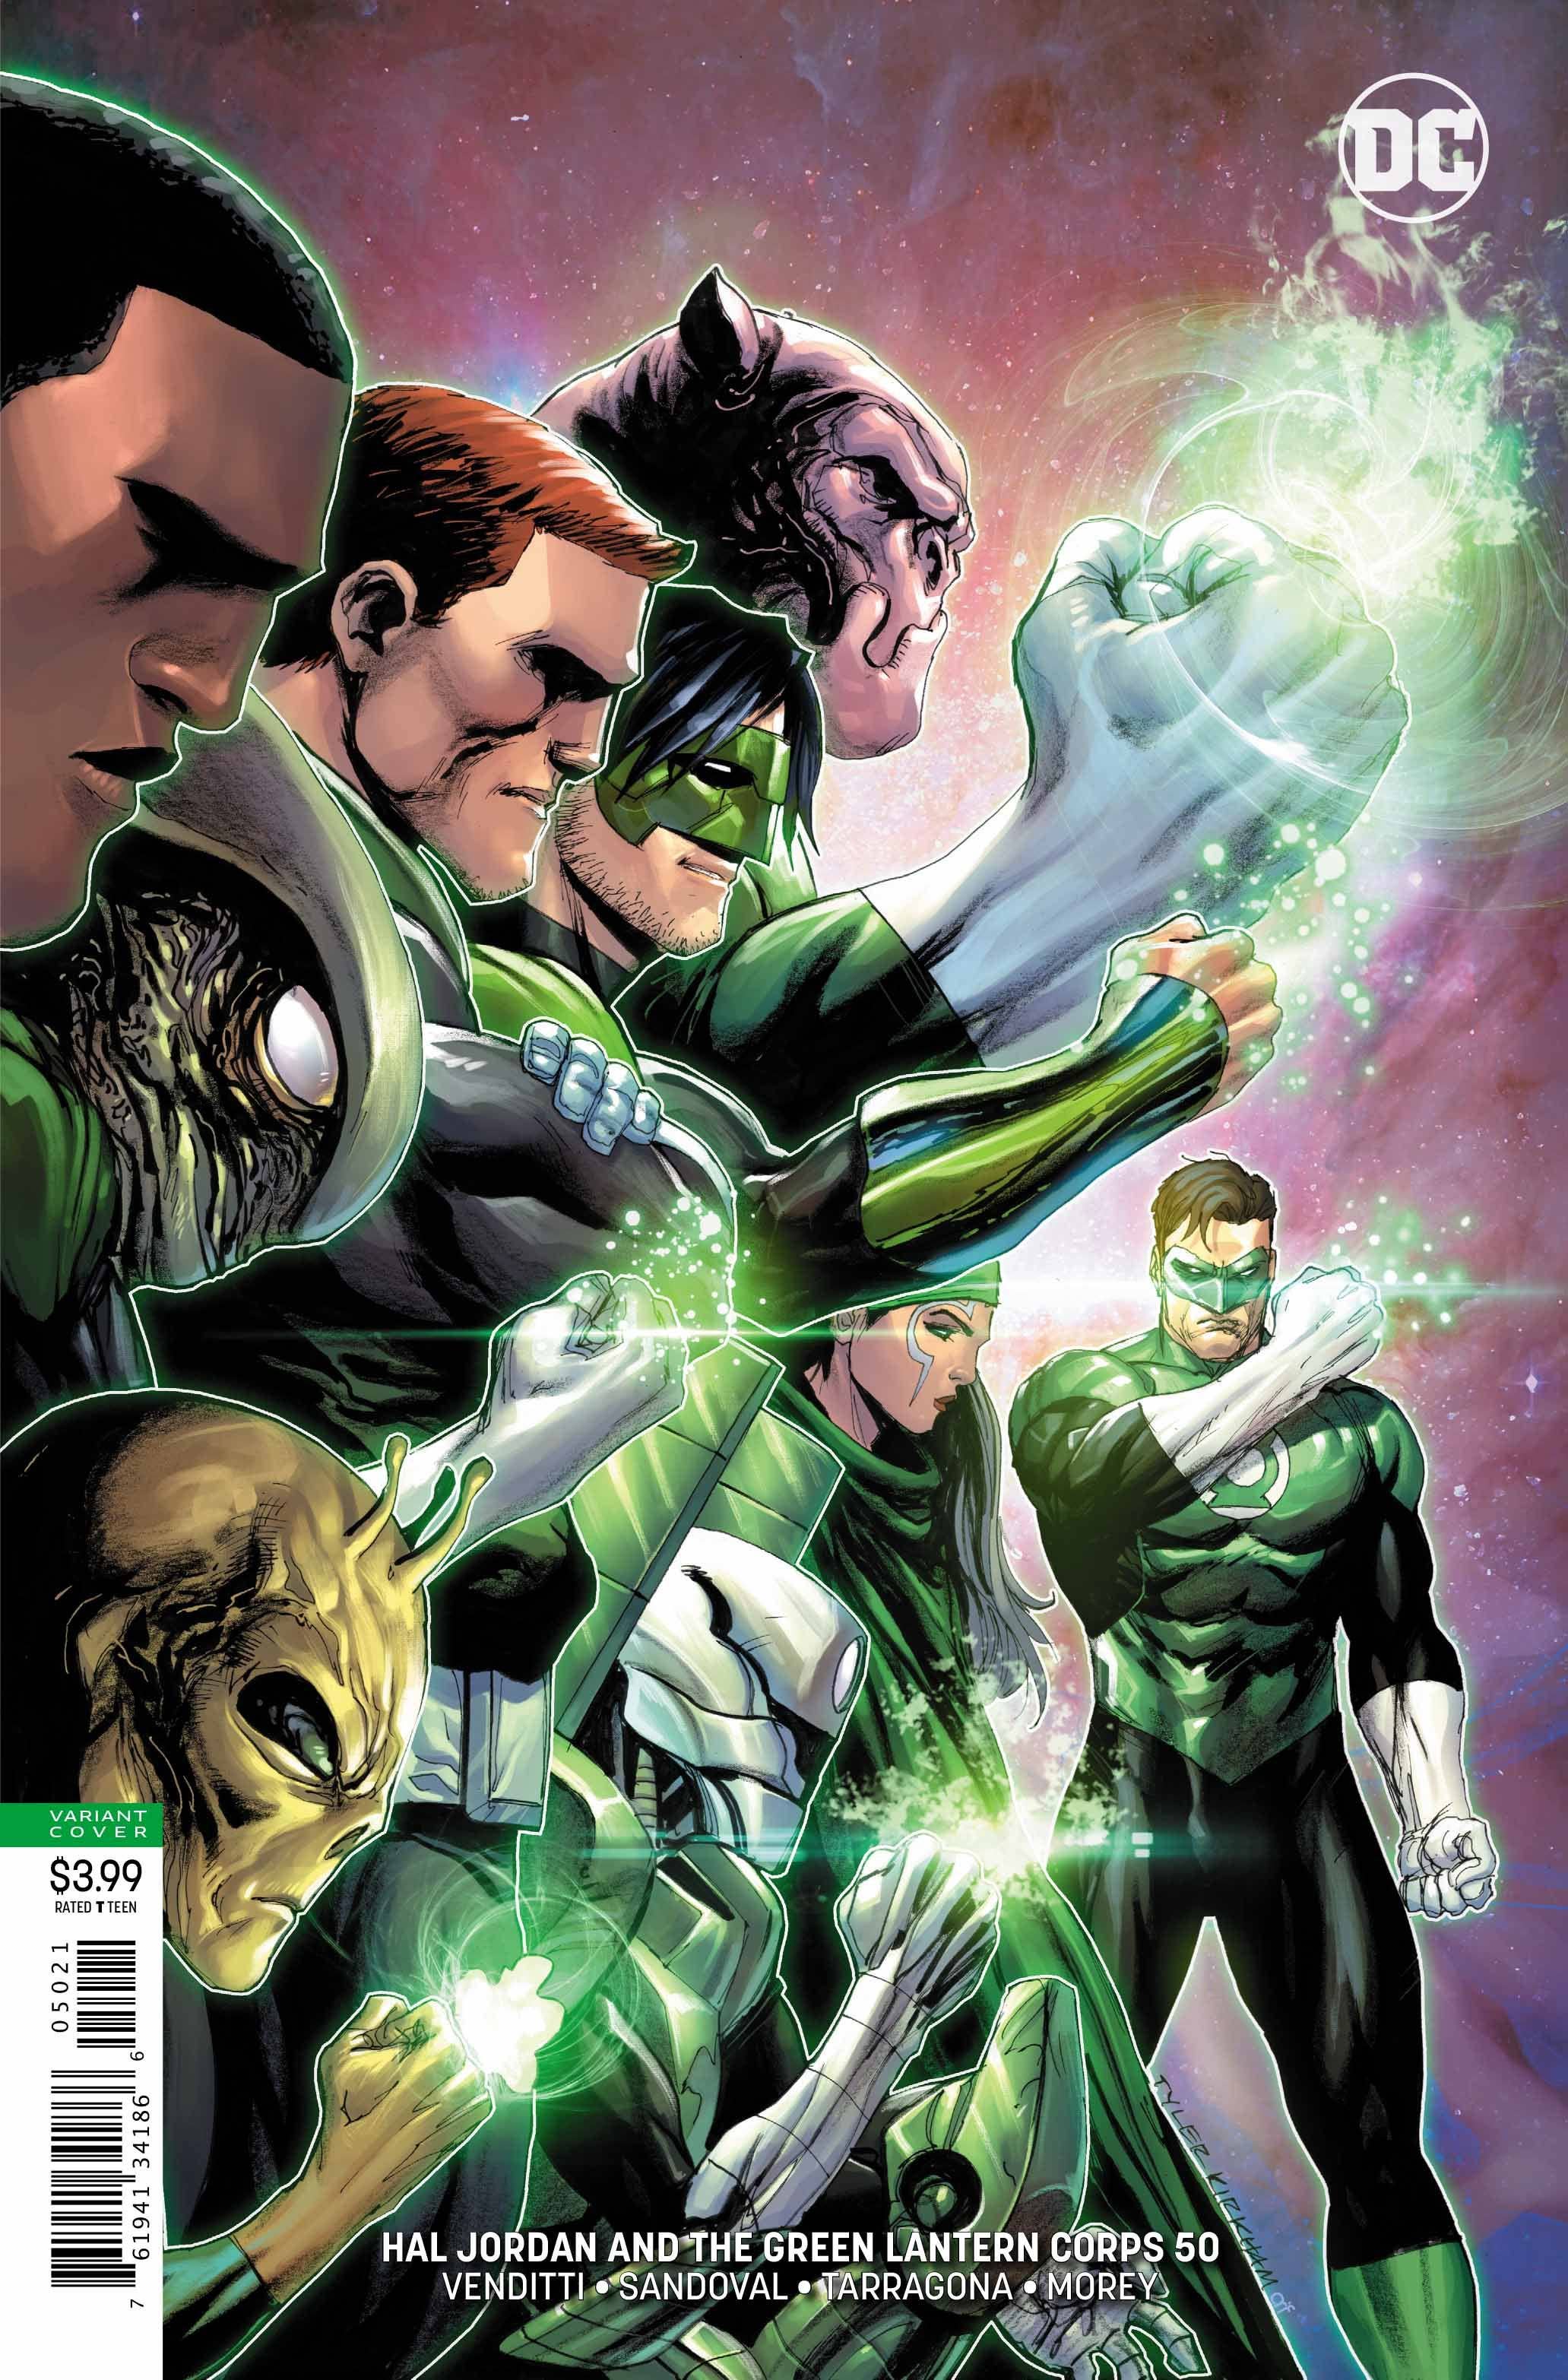 Exclusive: The cosmic series finale of Hal Jordan and the Green Lantern Corps with writer Robert Venditti Exclusive: The cosmic series finale of Hal Jordan and the Green Lantern Corps with writer